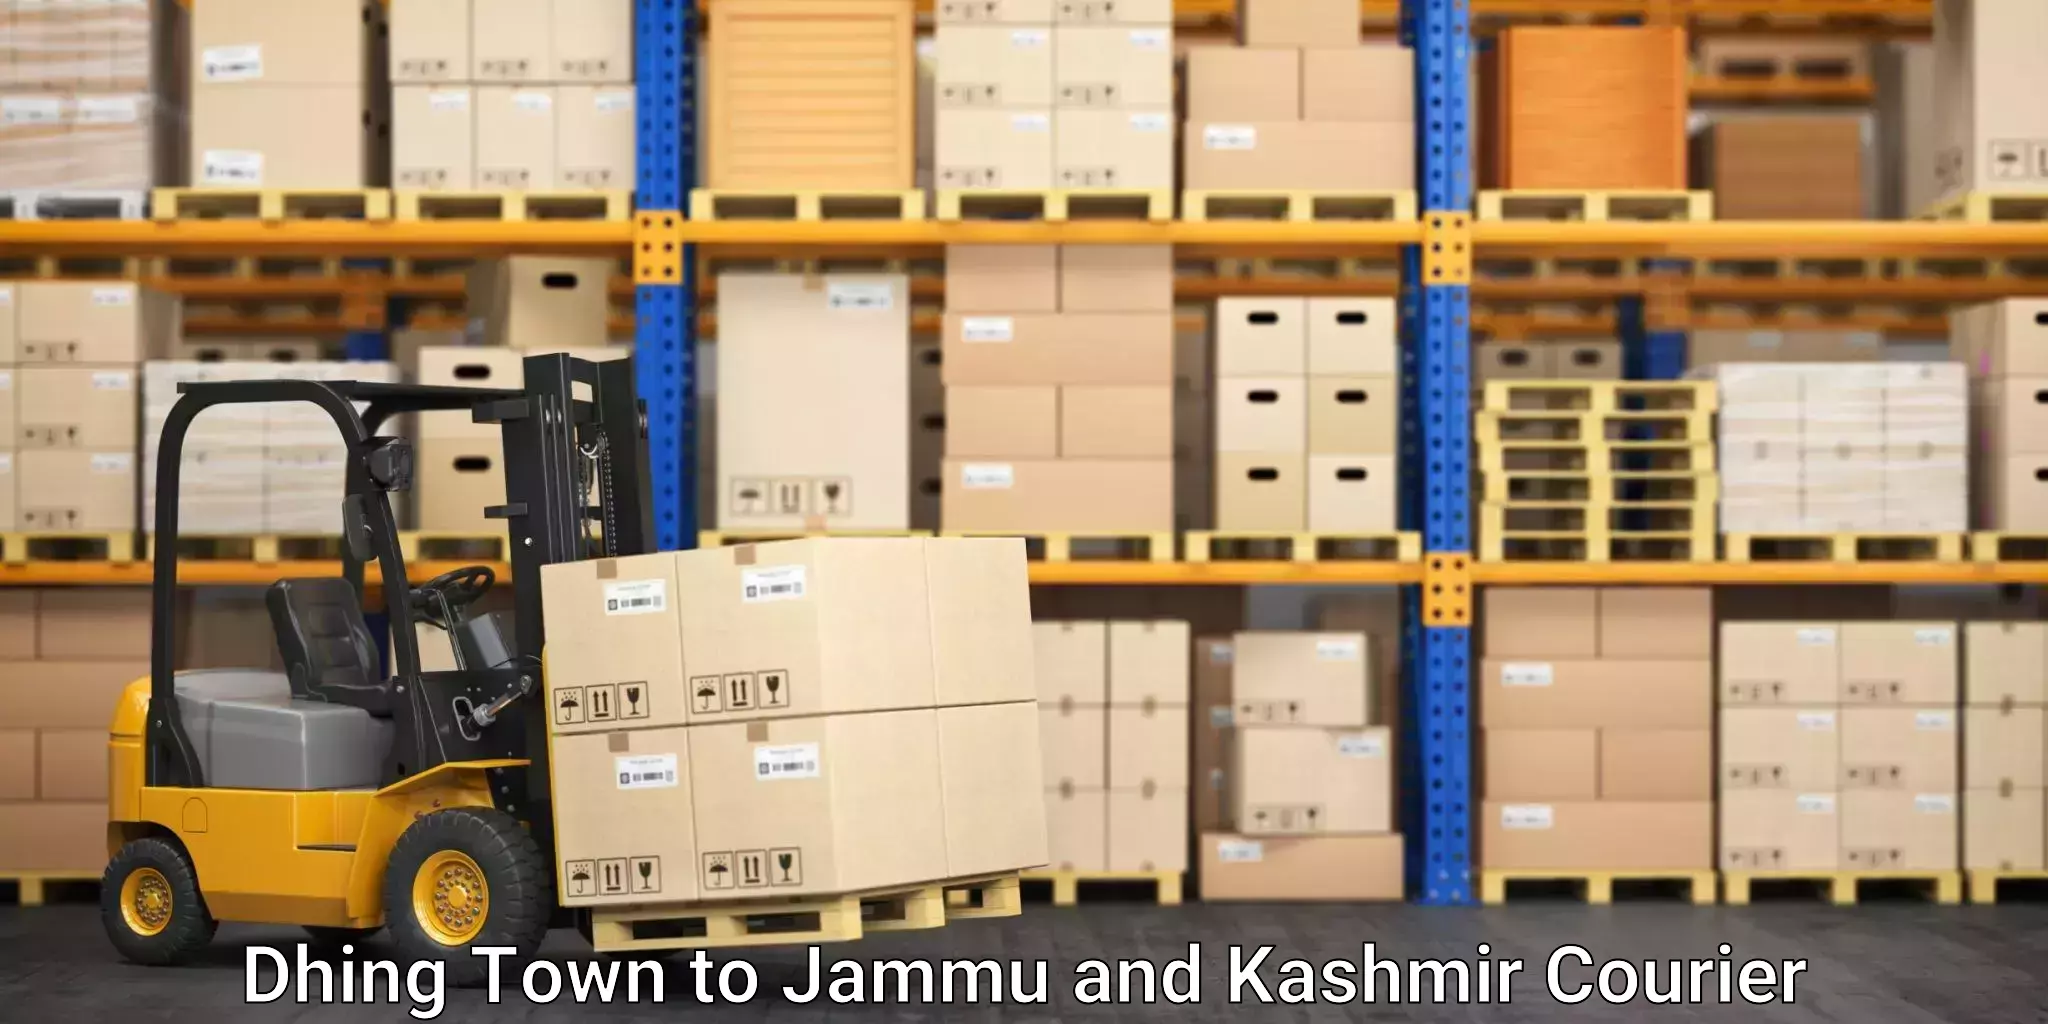 Logistics solutions in Dhing Town to Jammu